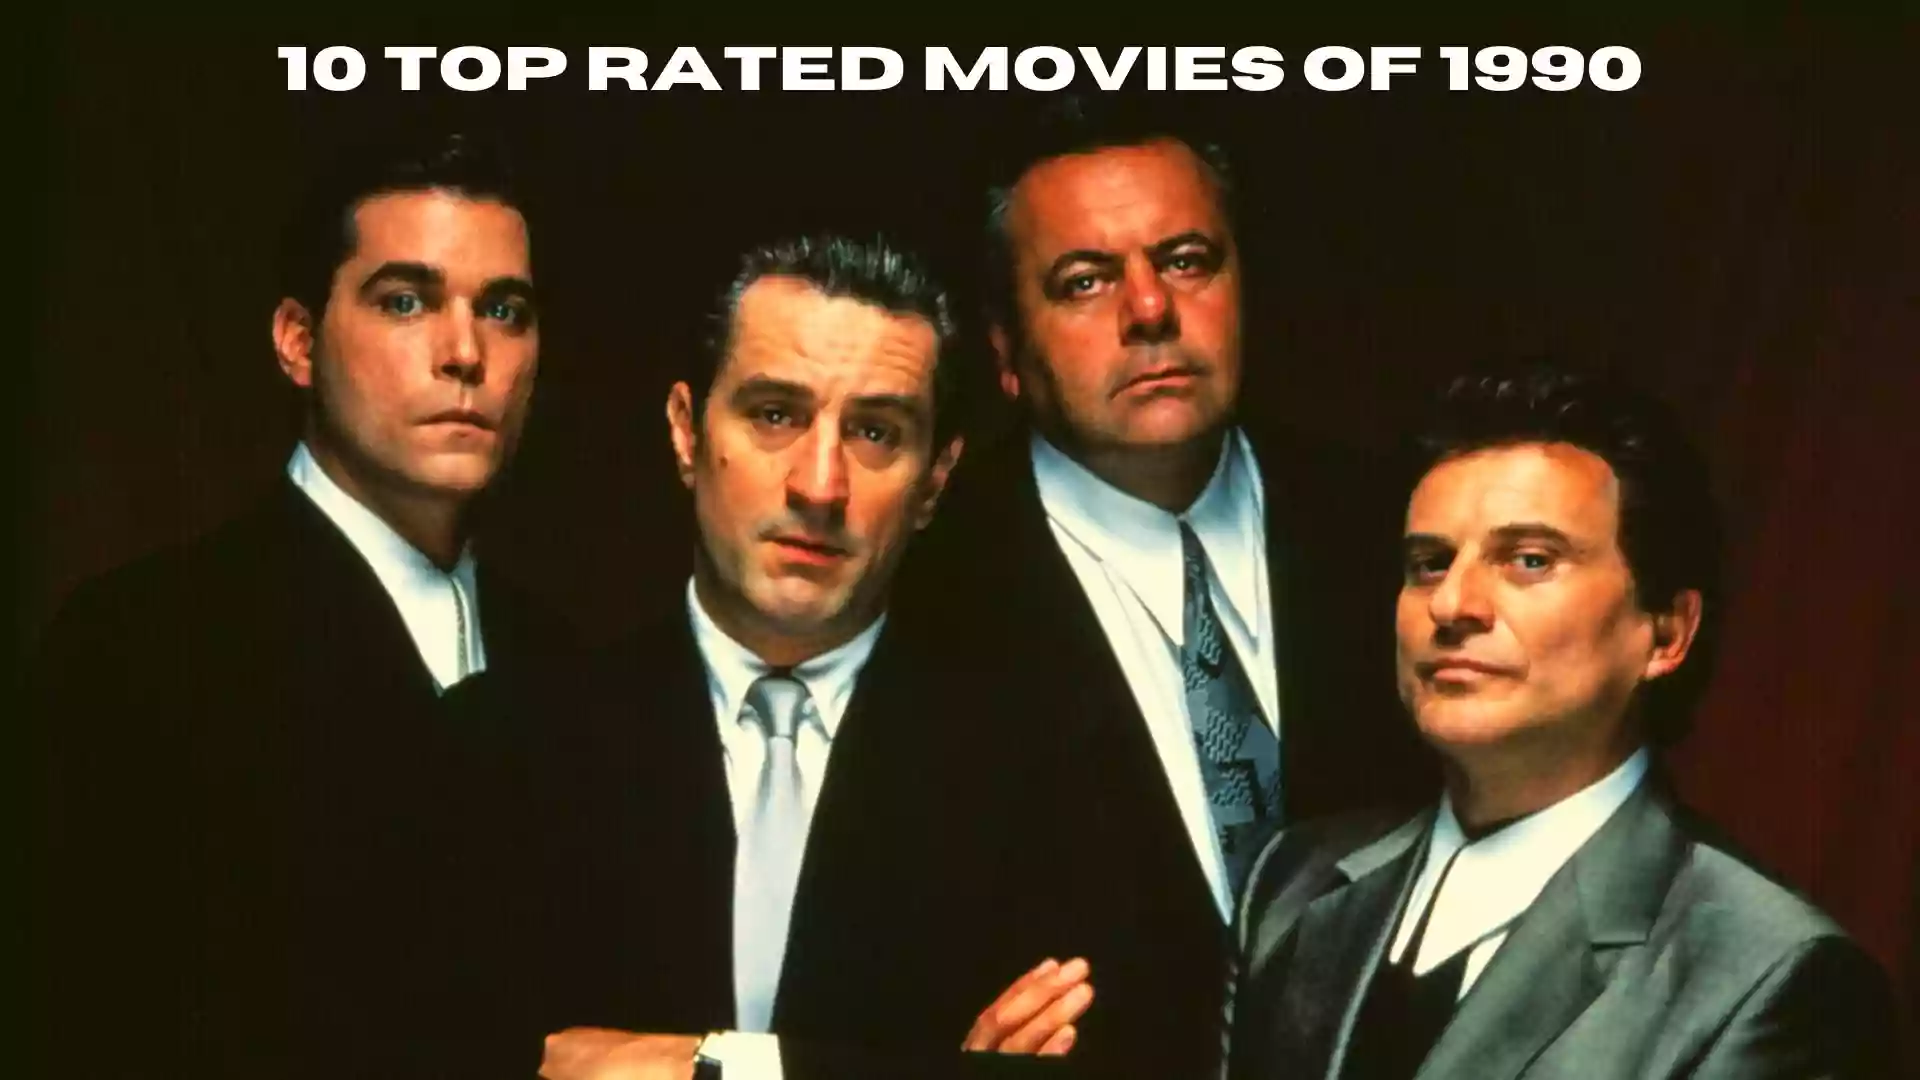 10 Top Rated Movies of 1990